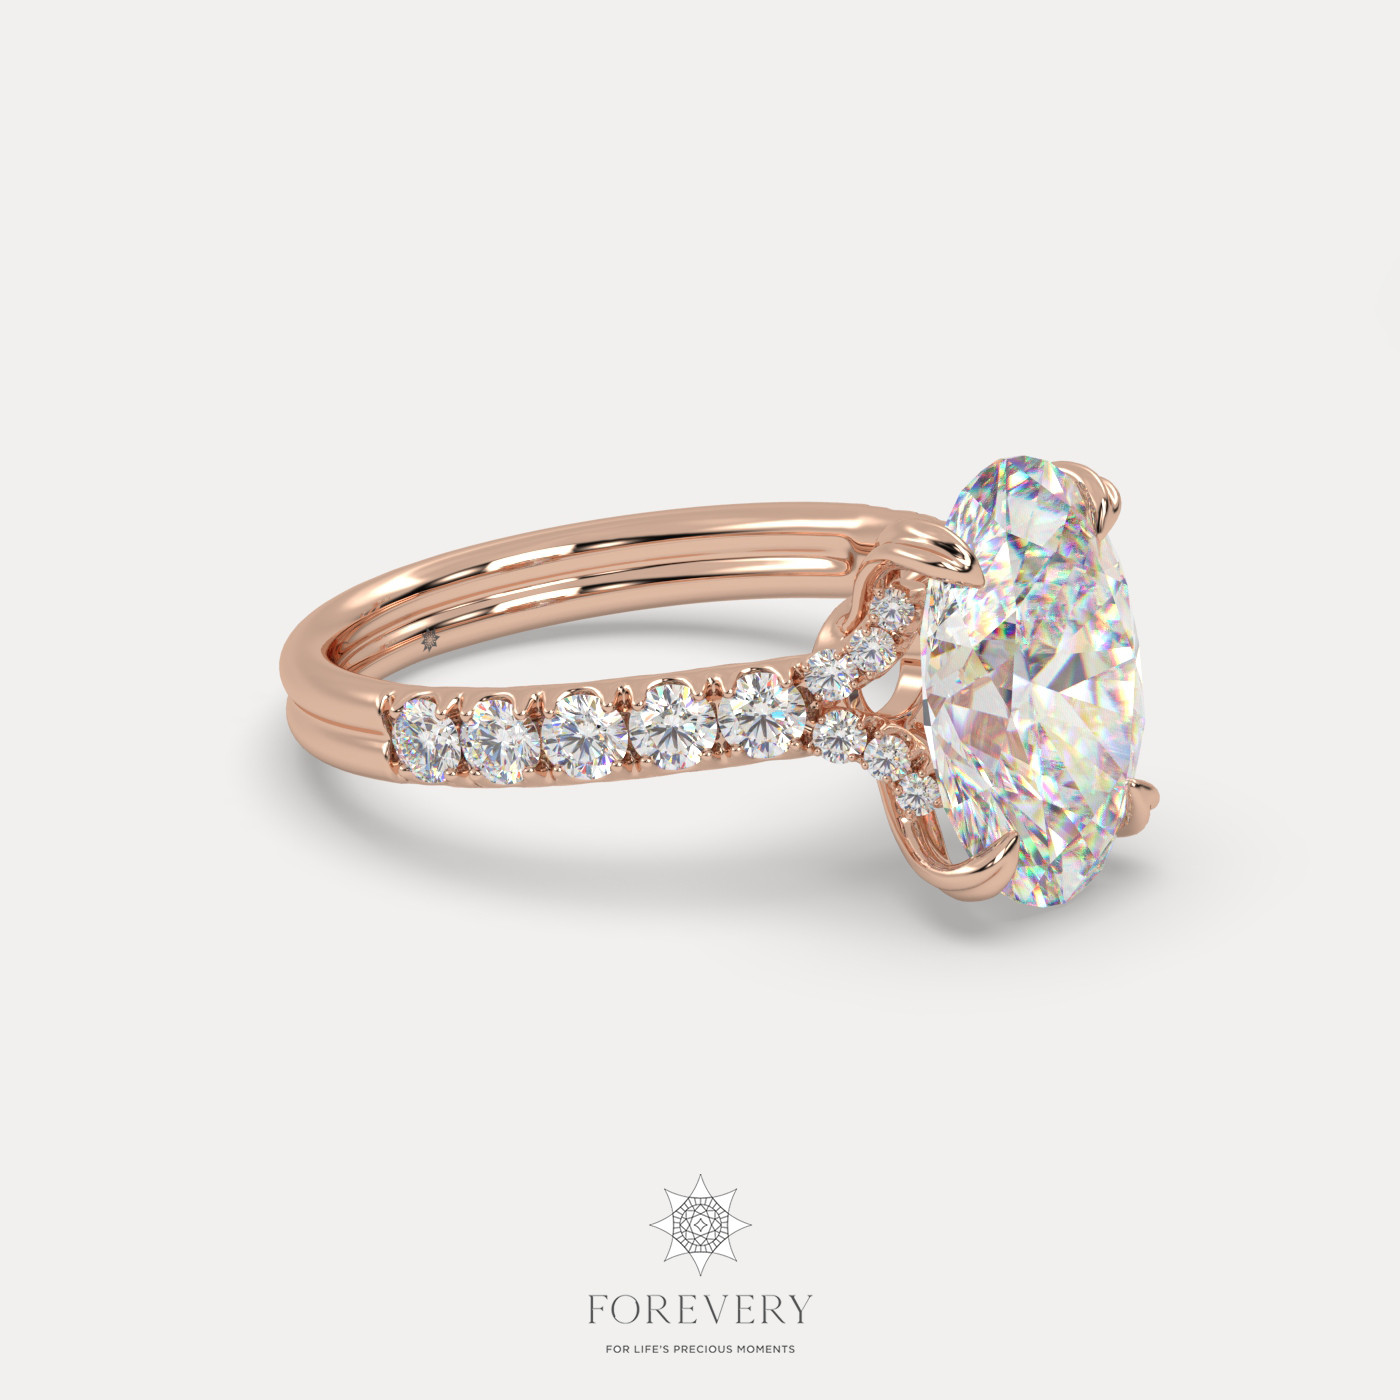 18K ROSE GOLD Oval Cut Pave-Style Diamond Engagement Ring